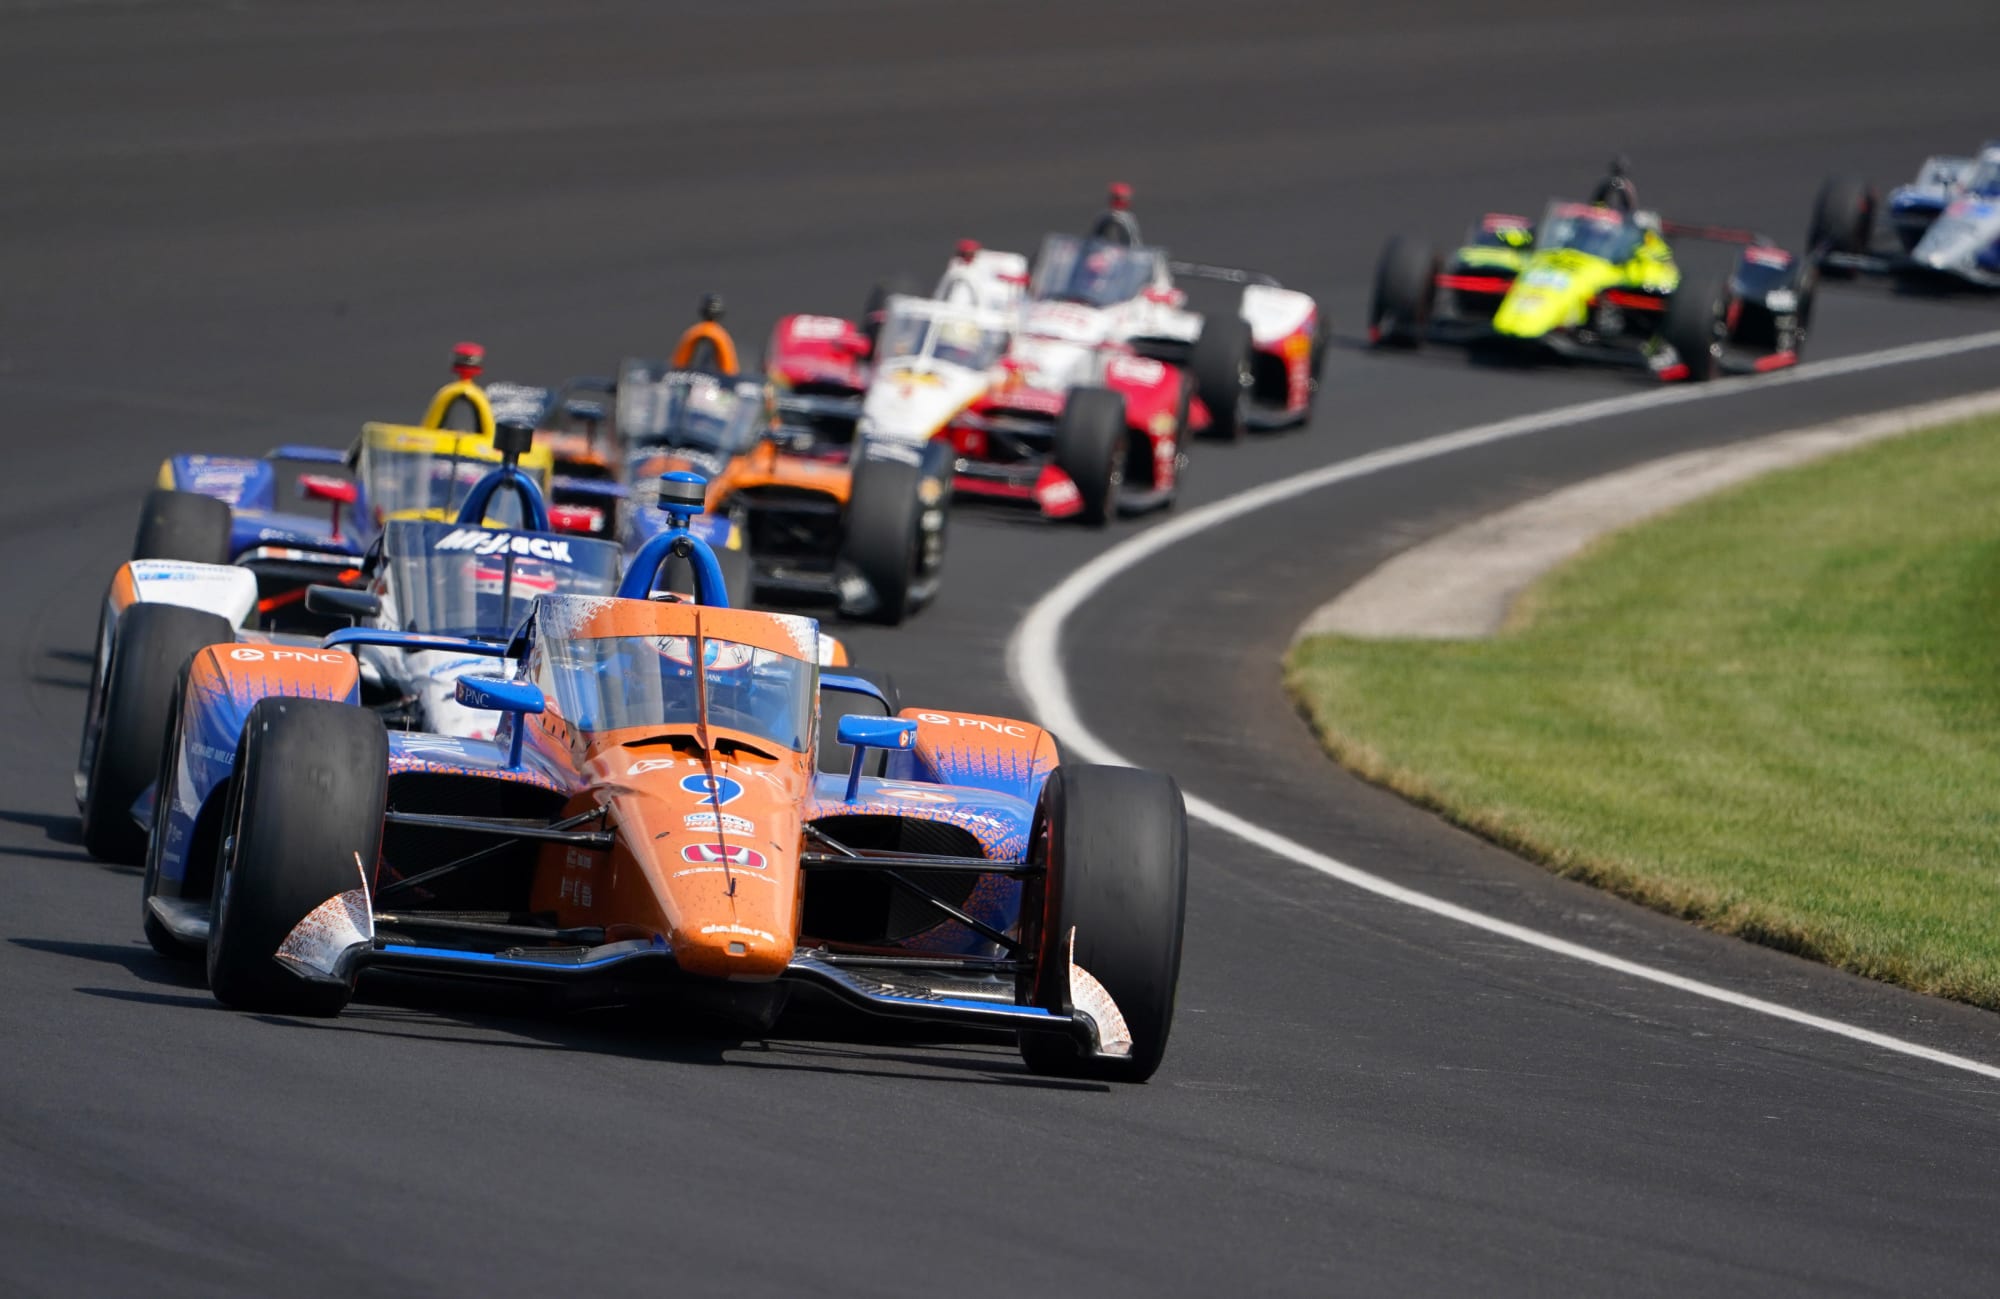 IndyCar: 2021 Indy 500 entry list - The remaining unknowns